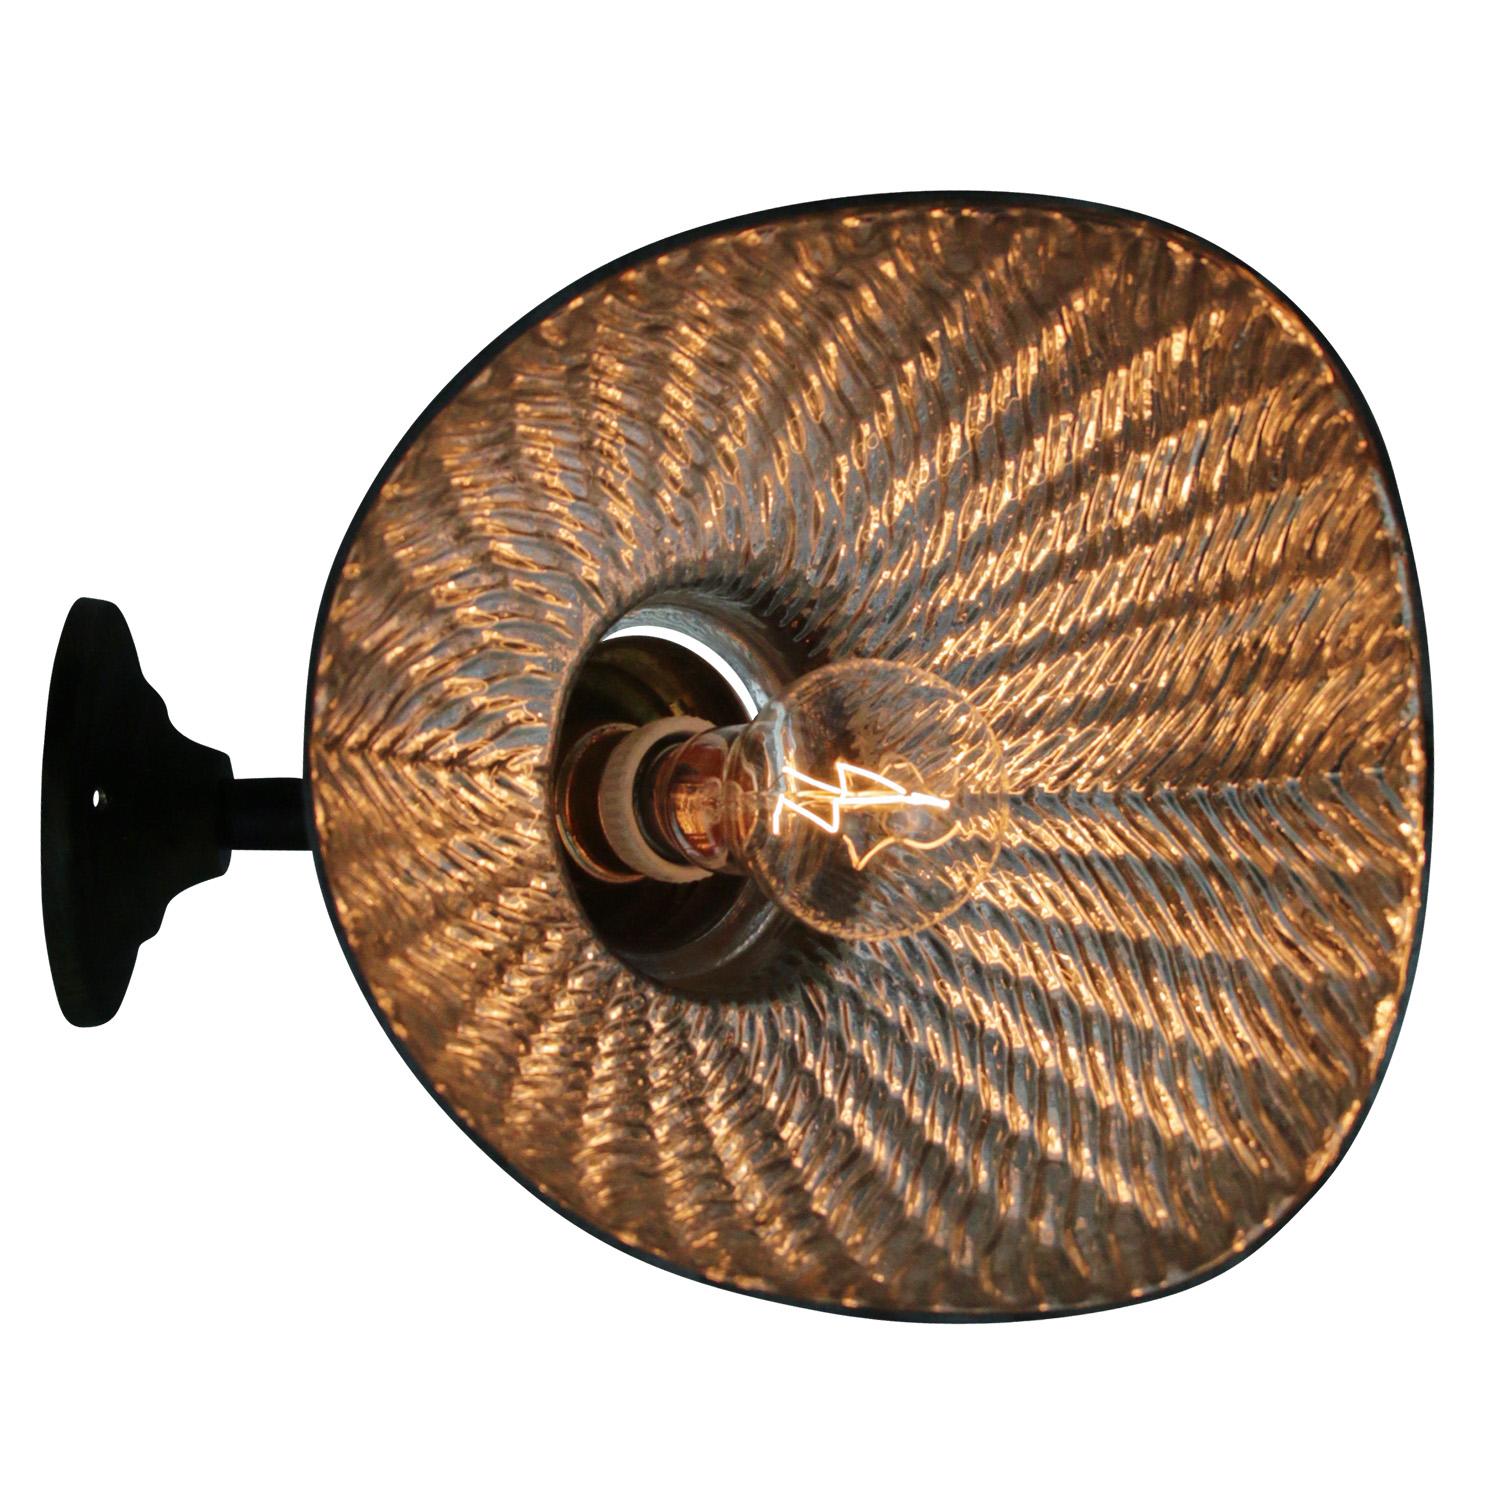 German mercury glass wall lamp.
Brass with glass shade.

Diameter wall mount 10 cm

Weight: 1.10 kg / 2.4 lb

Priced per individual item. All lamps have been made suitable by international standards for incandescent light bulbs,